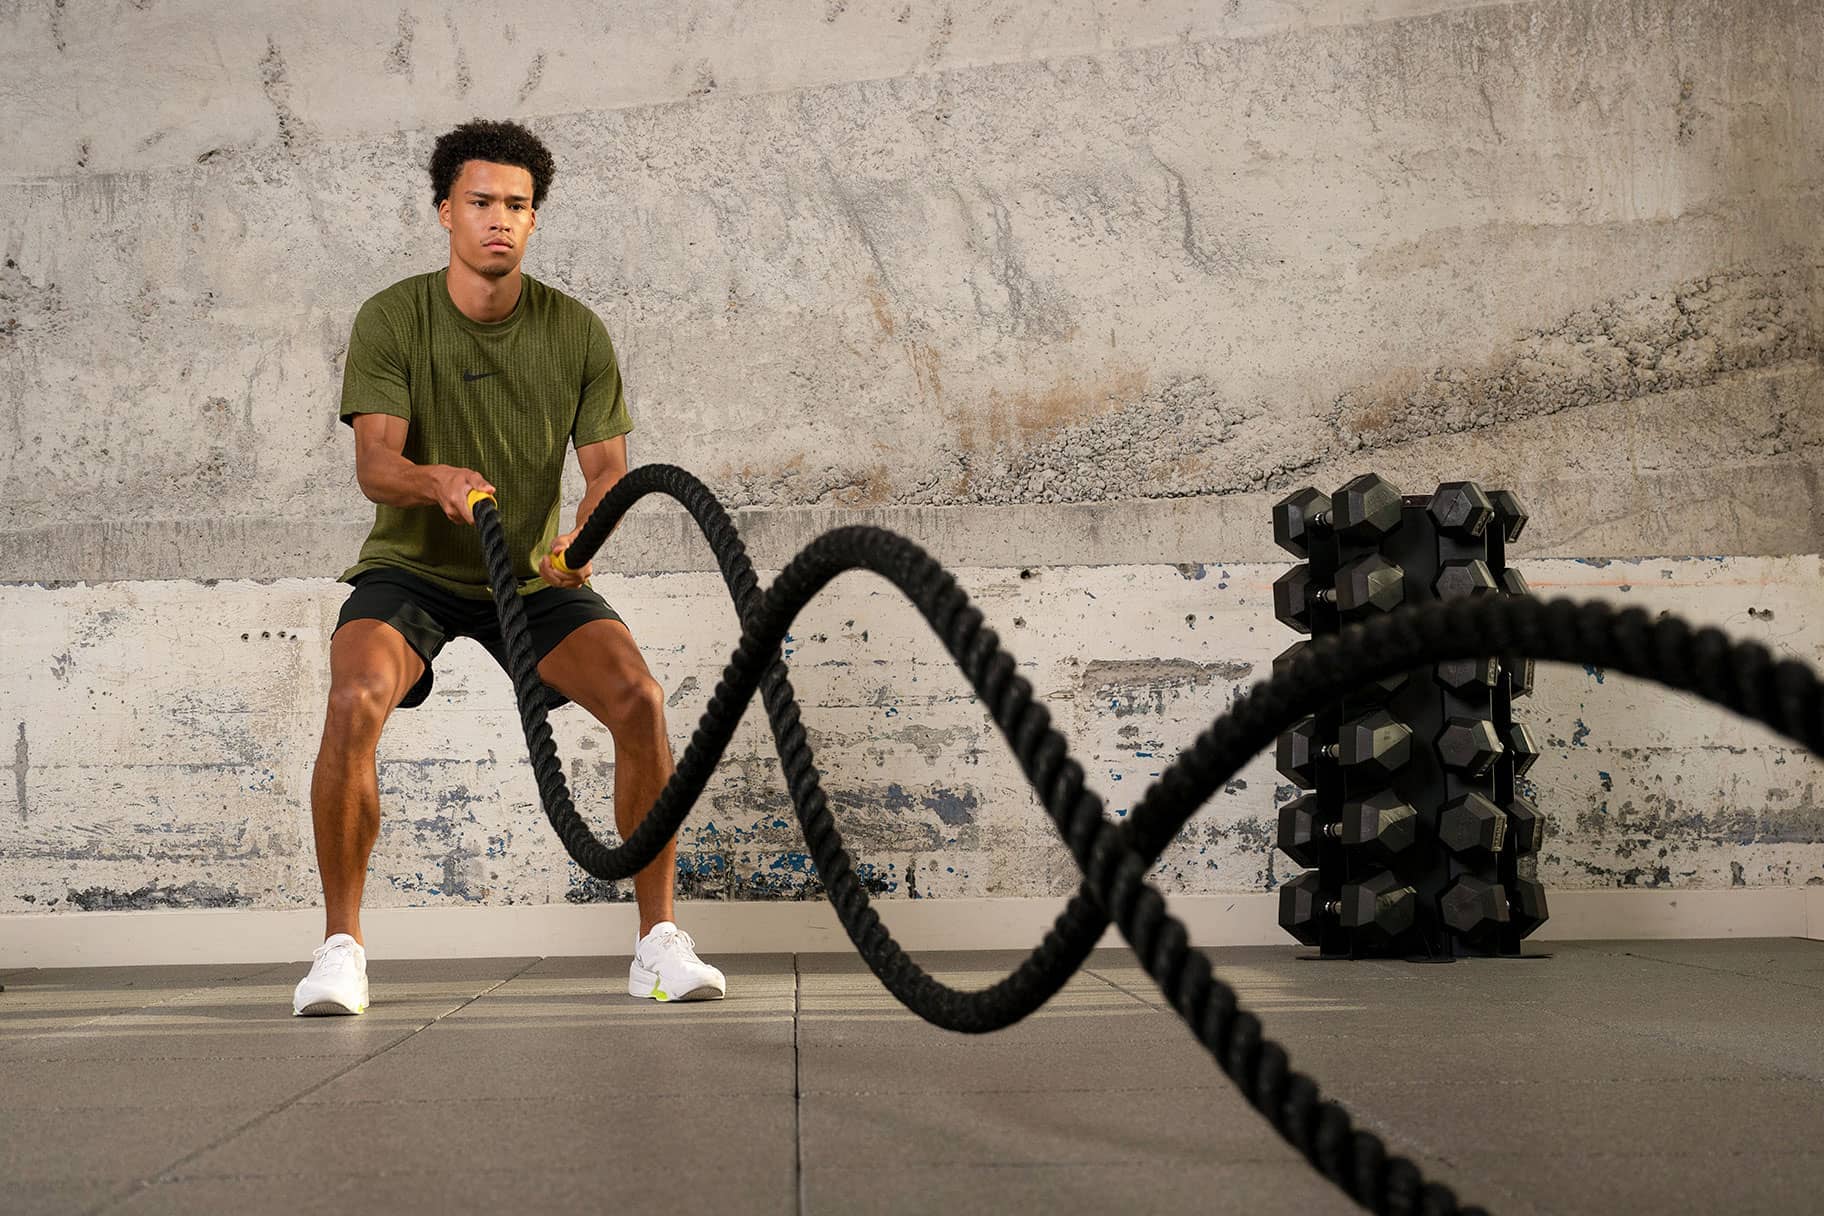 The Beginner's Guide To Battle Rope Exercises - Muscle & Fitness